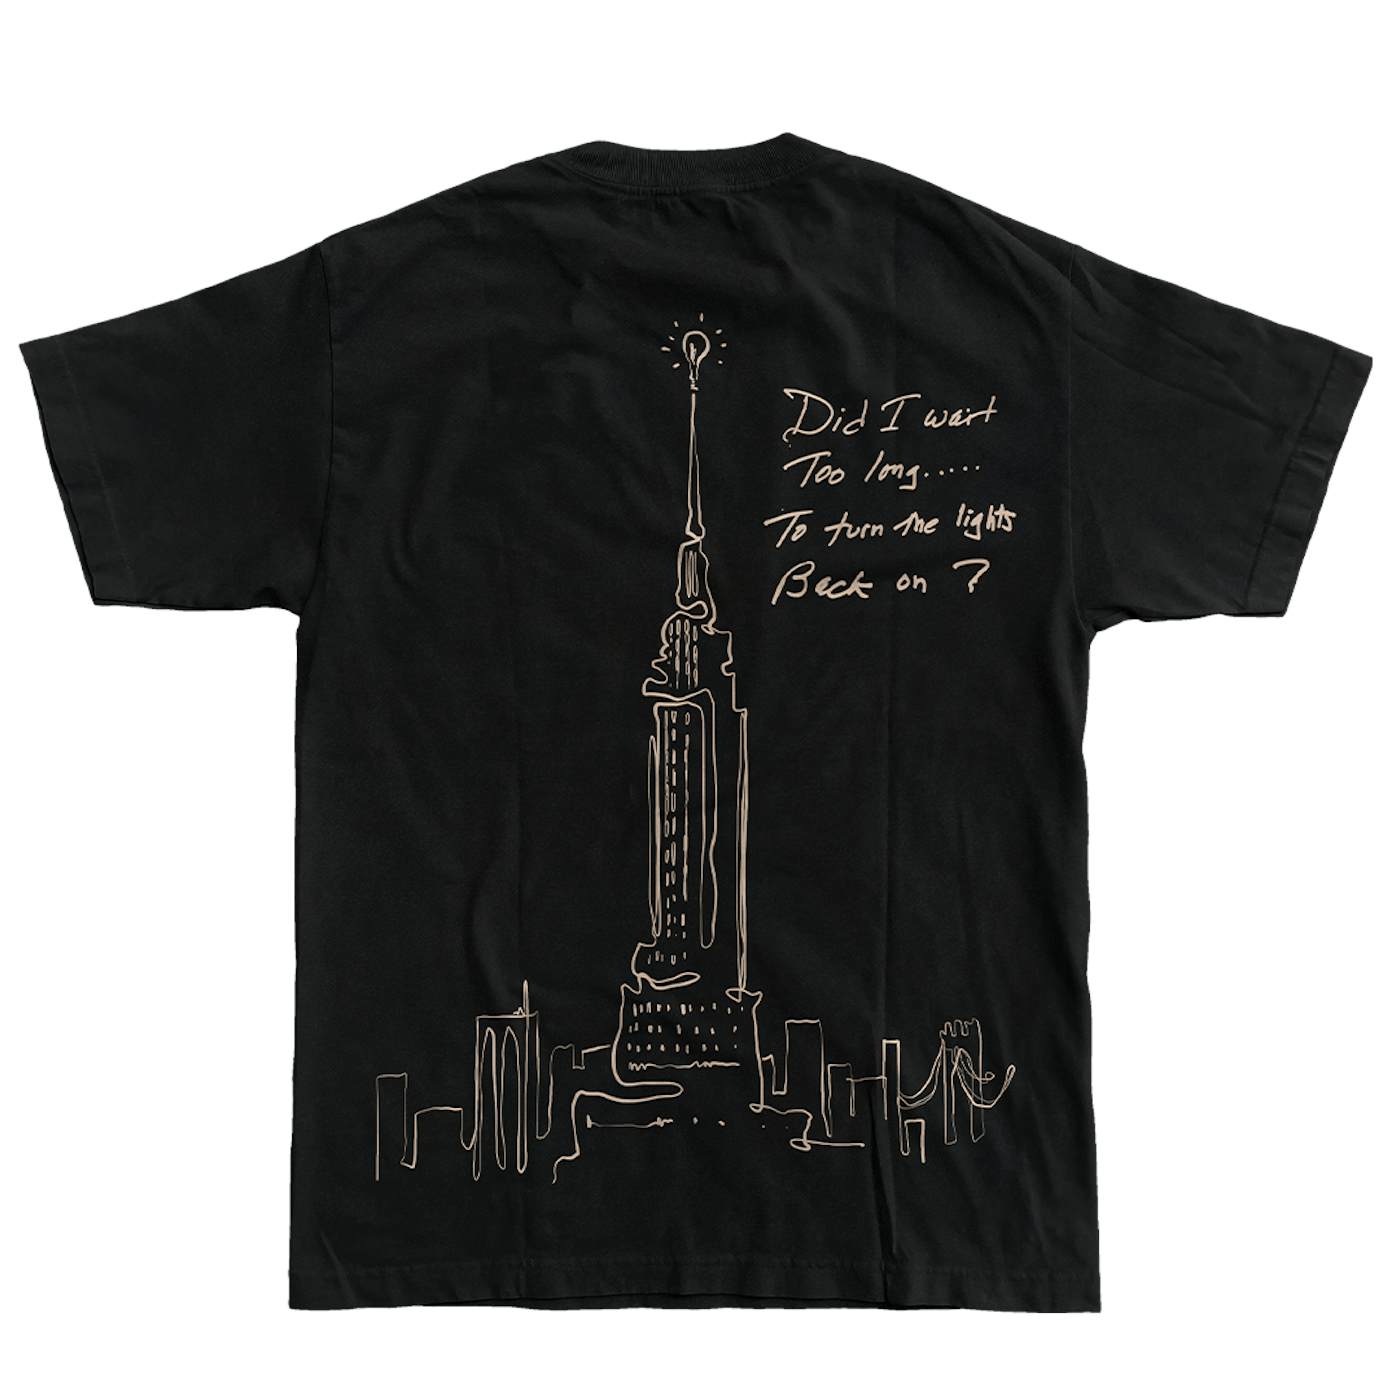 Billy Joel "Turn The Lights Back On Empire" Black T-Shirt- Online Exclusive